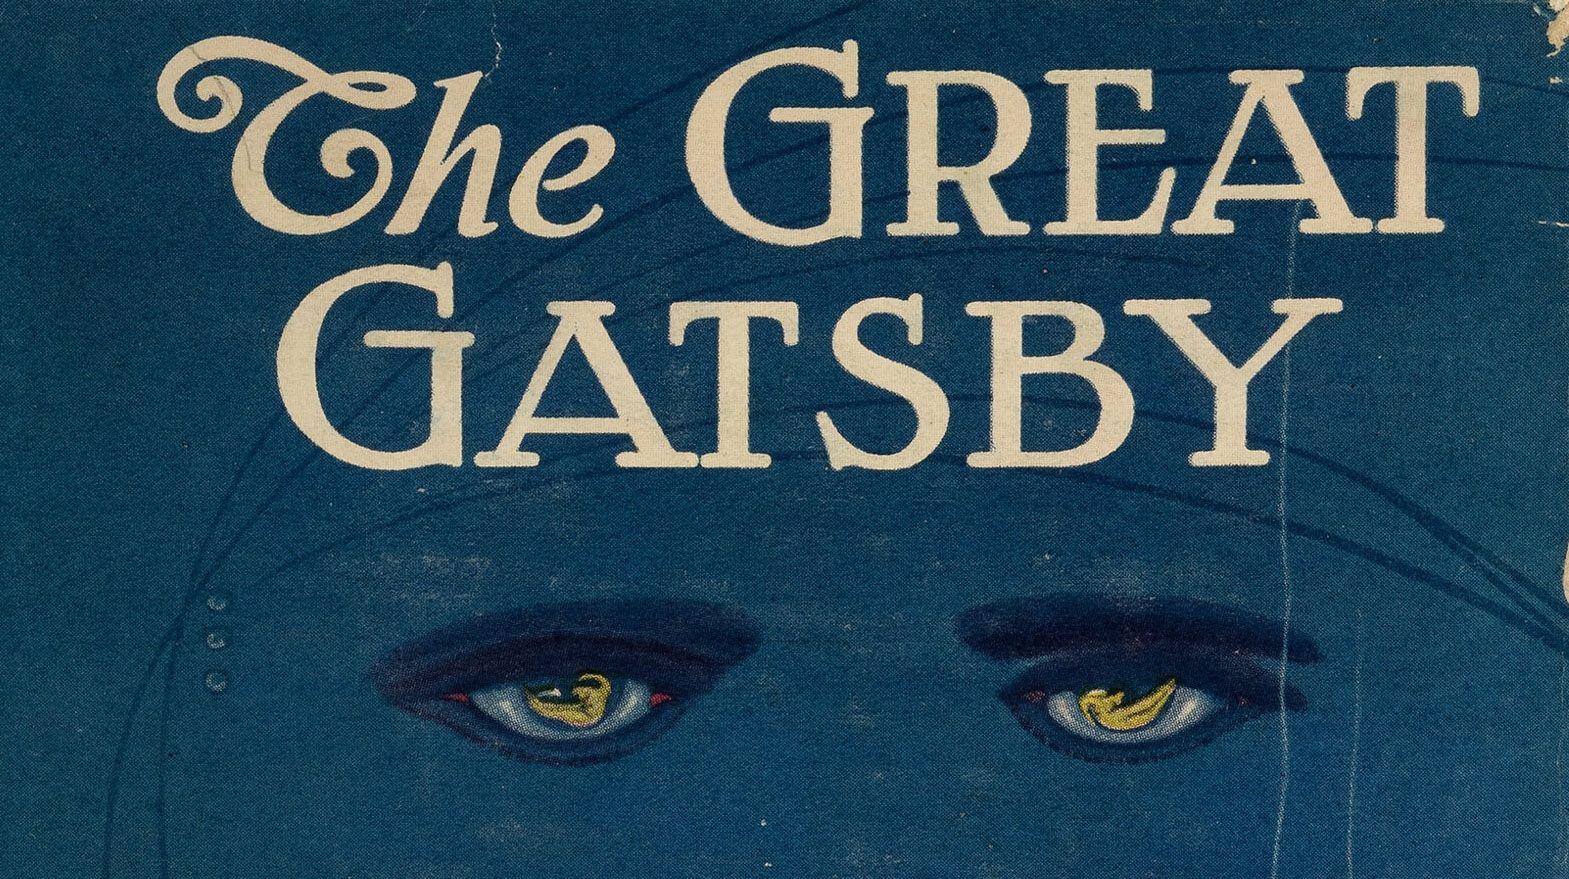 Cover Image for Signed 'Great Gatsby' sells for record $450,000 